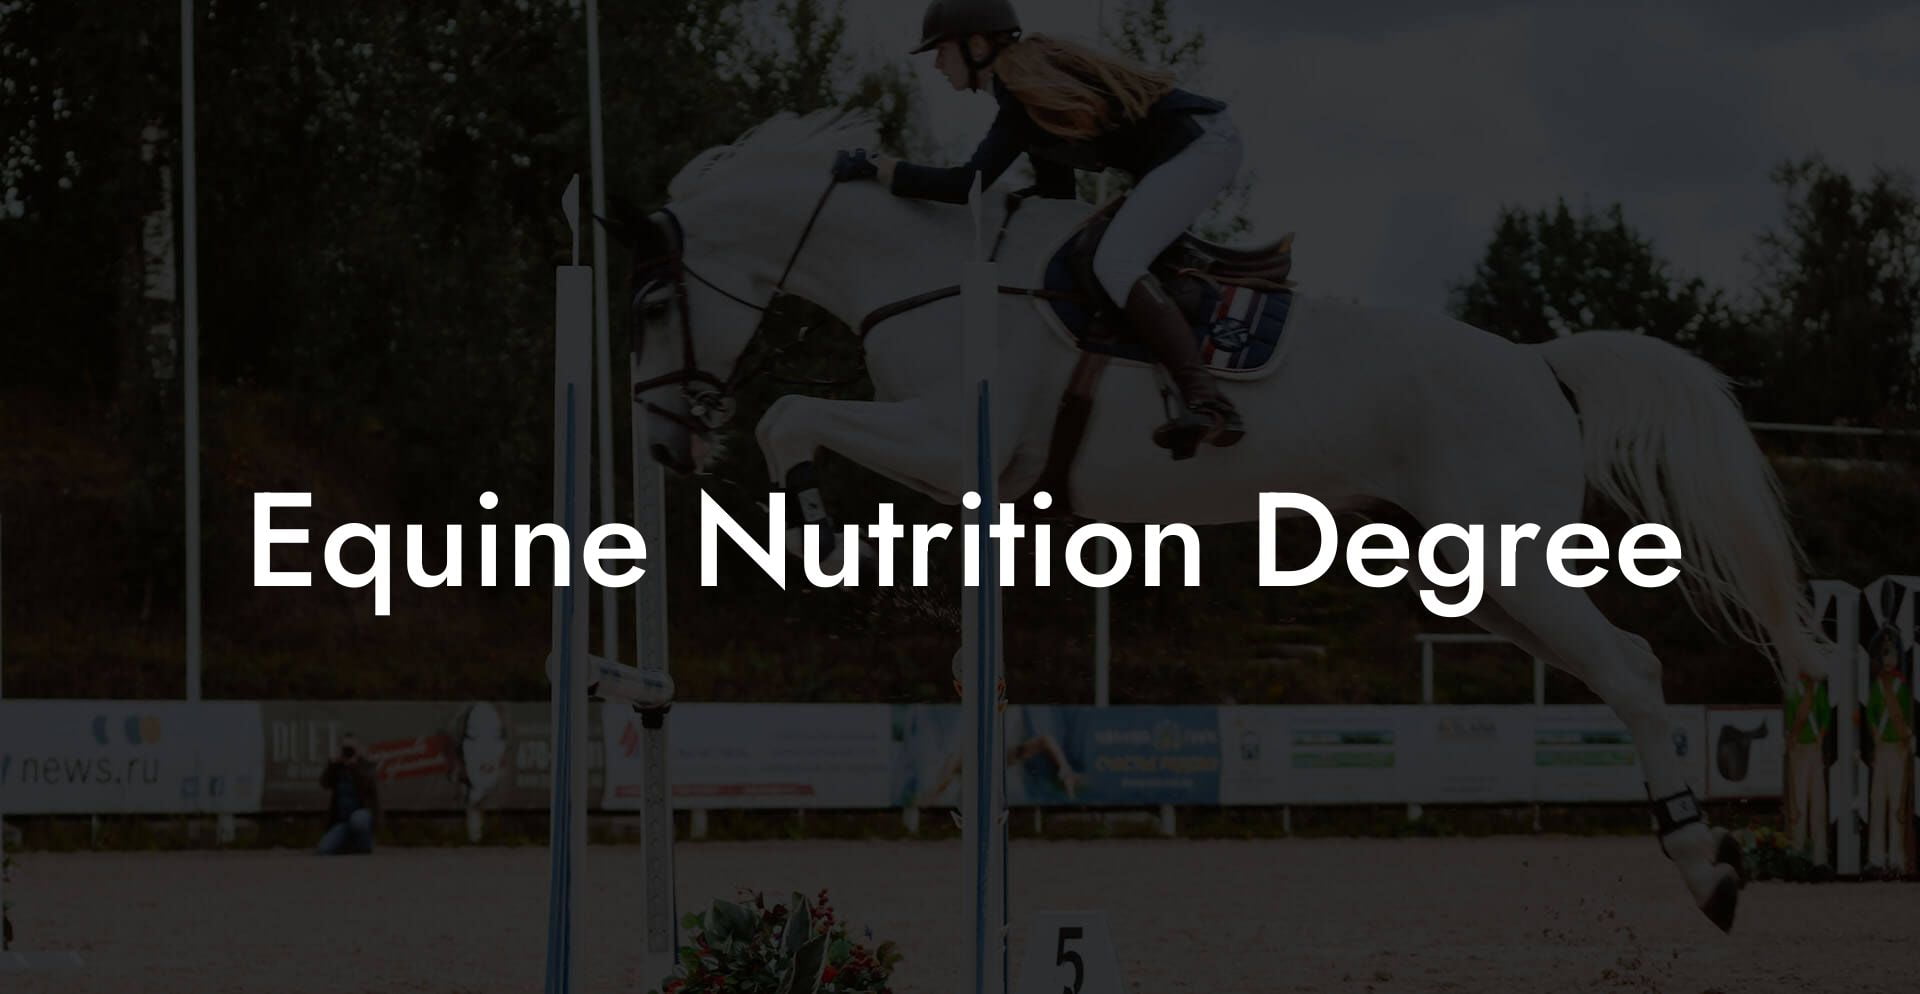 Equine Nutrition Degree